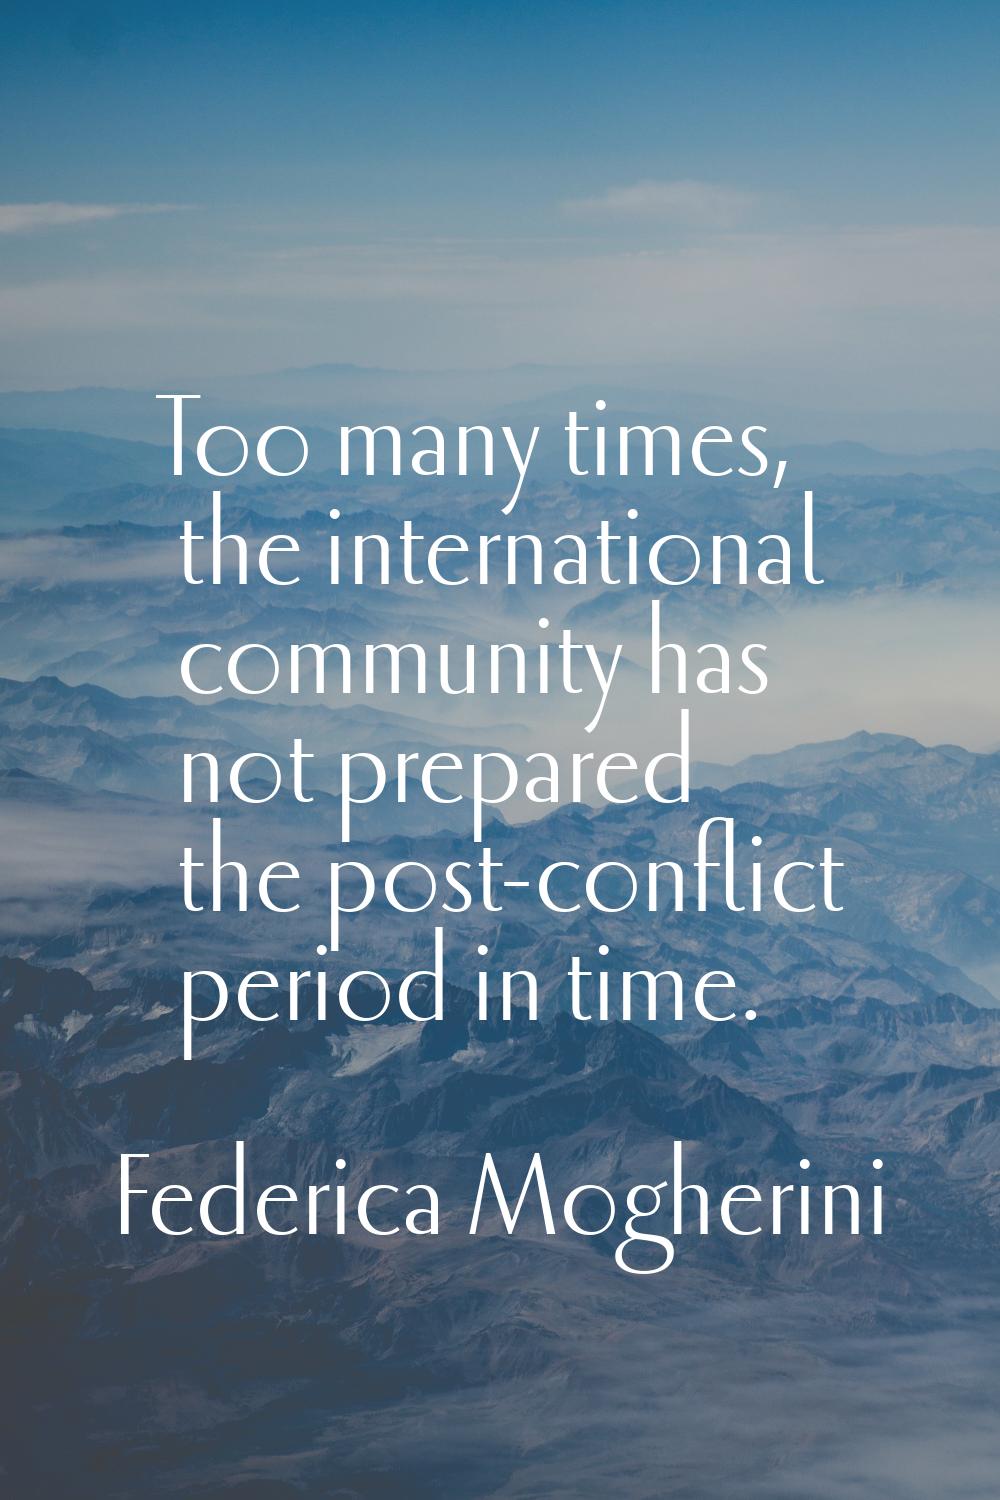 Too many times, the international community has not prepared the post-conflict period in time.